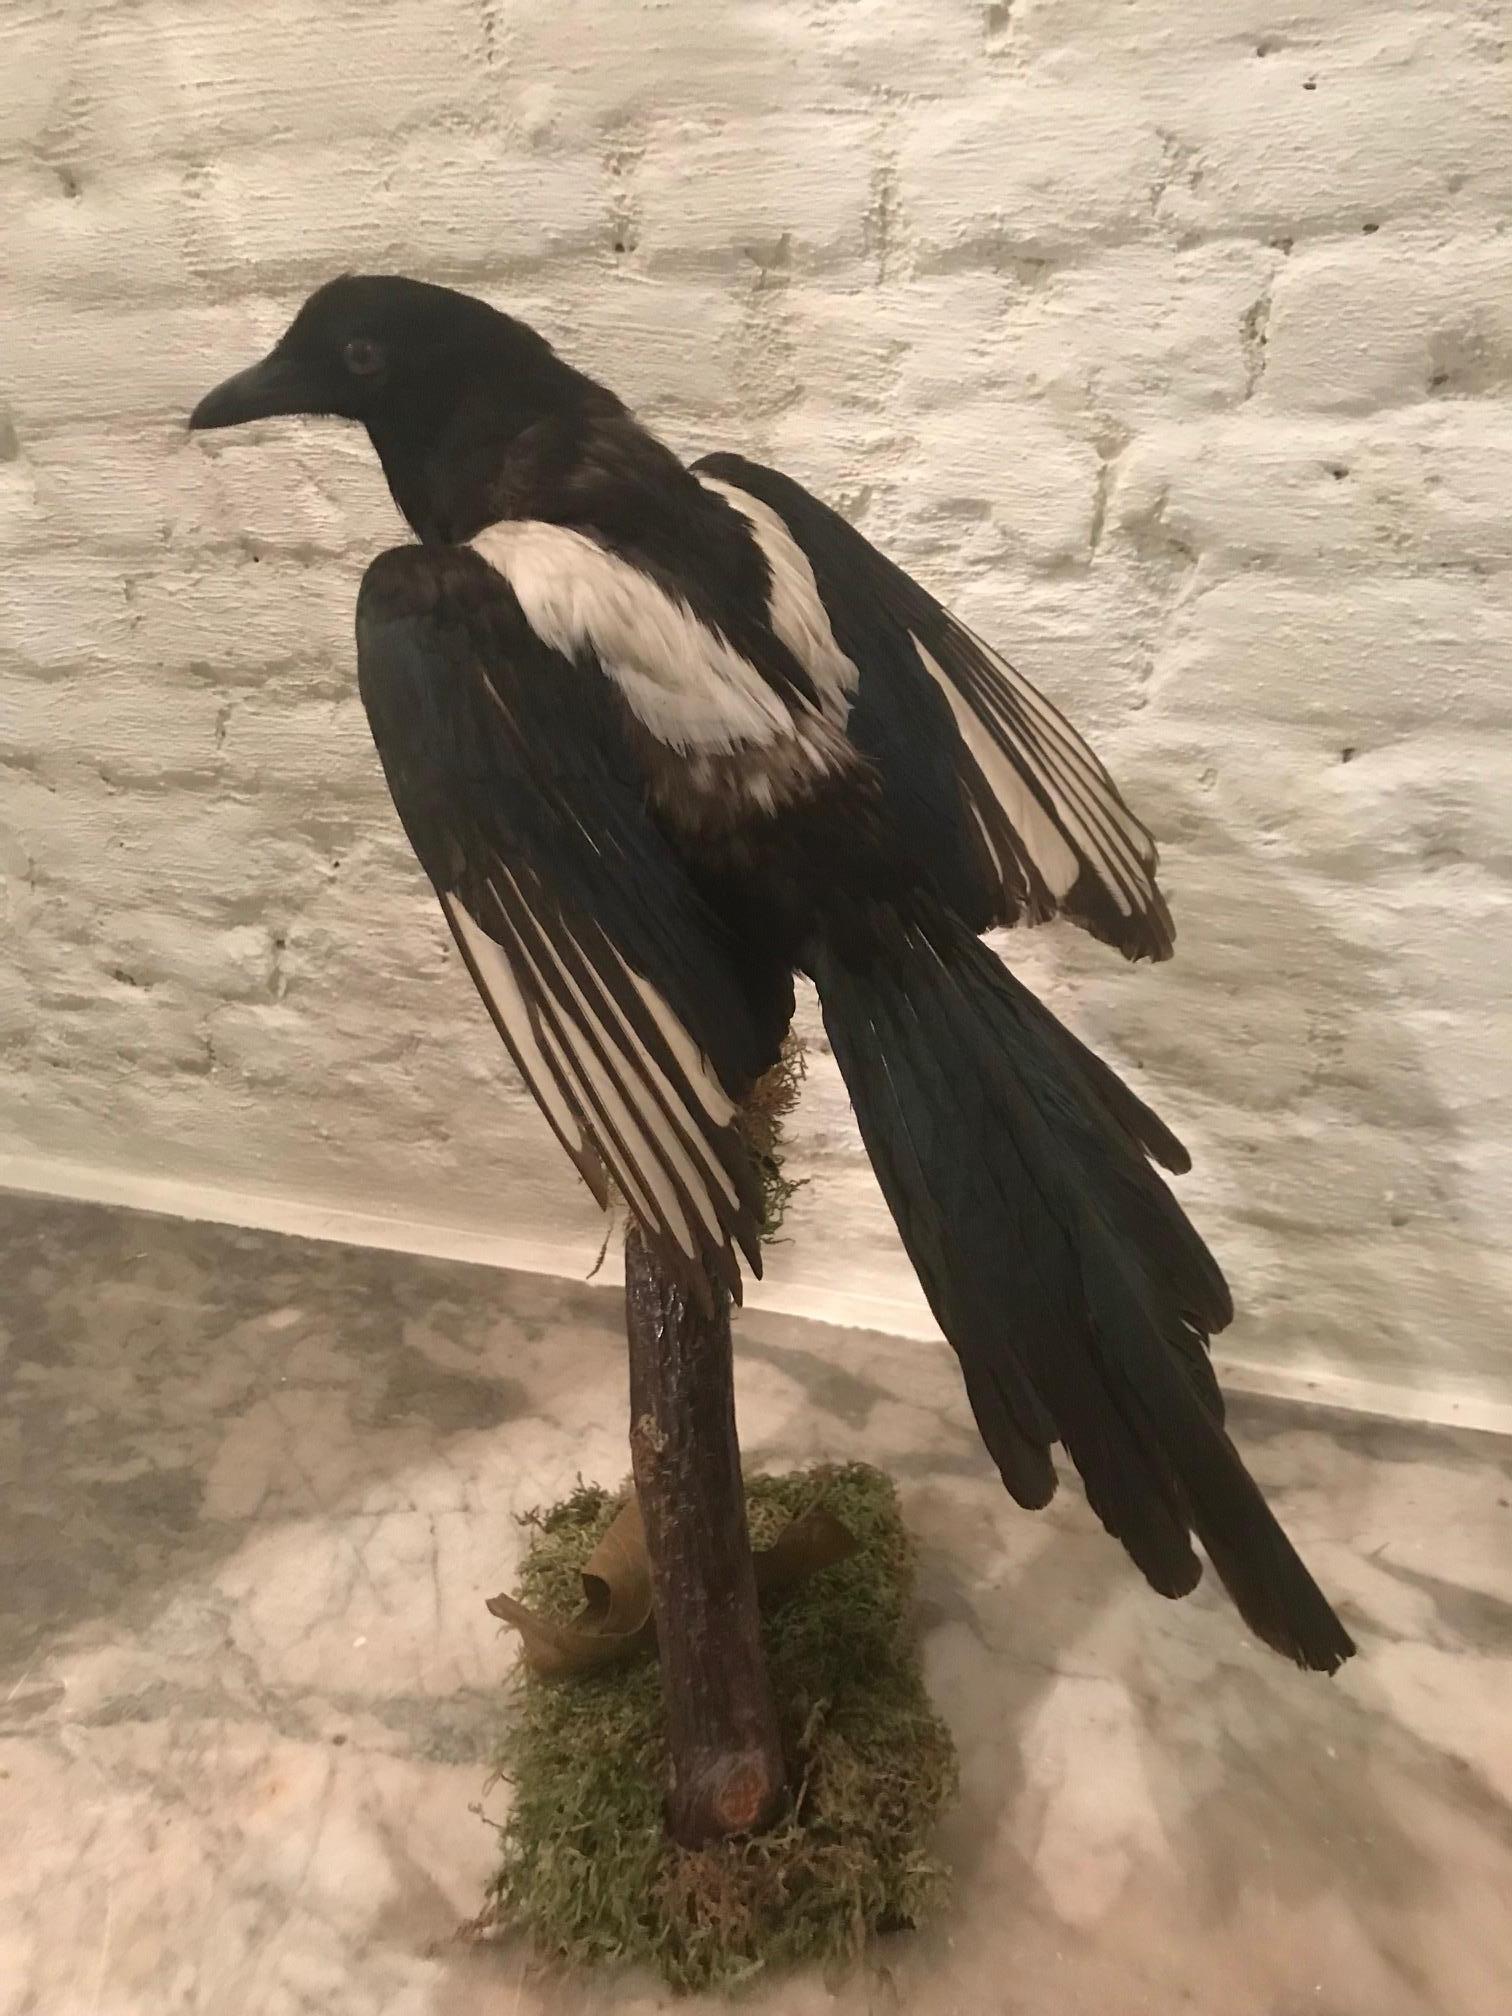 A vintage Belgian taxidermy Ekster (in flemish) Magpie bird. In overall good condition with beautiful iridescent feathers.
Please note that we do not ship taxidermy to the USA, if you are in the USA please contact a 1stdibs representative for